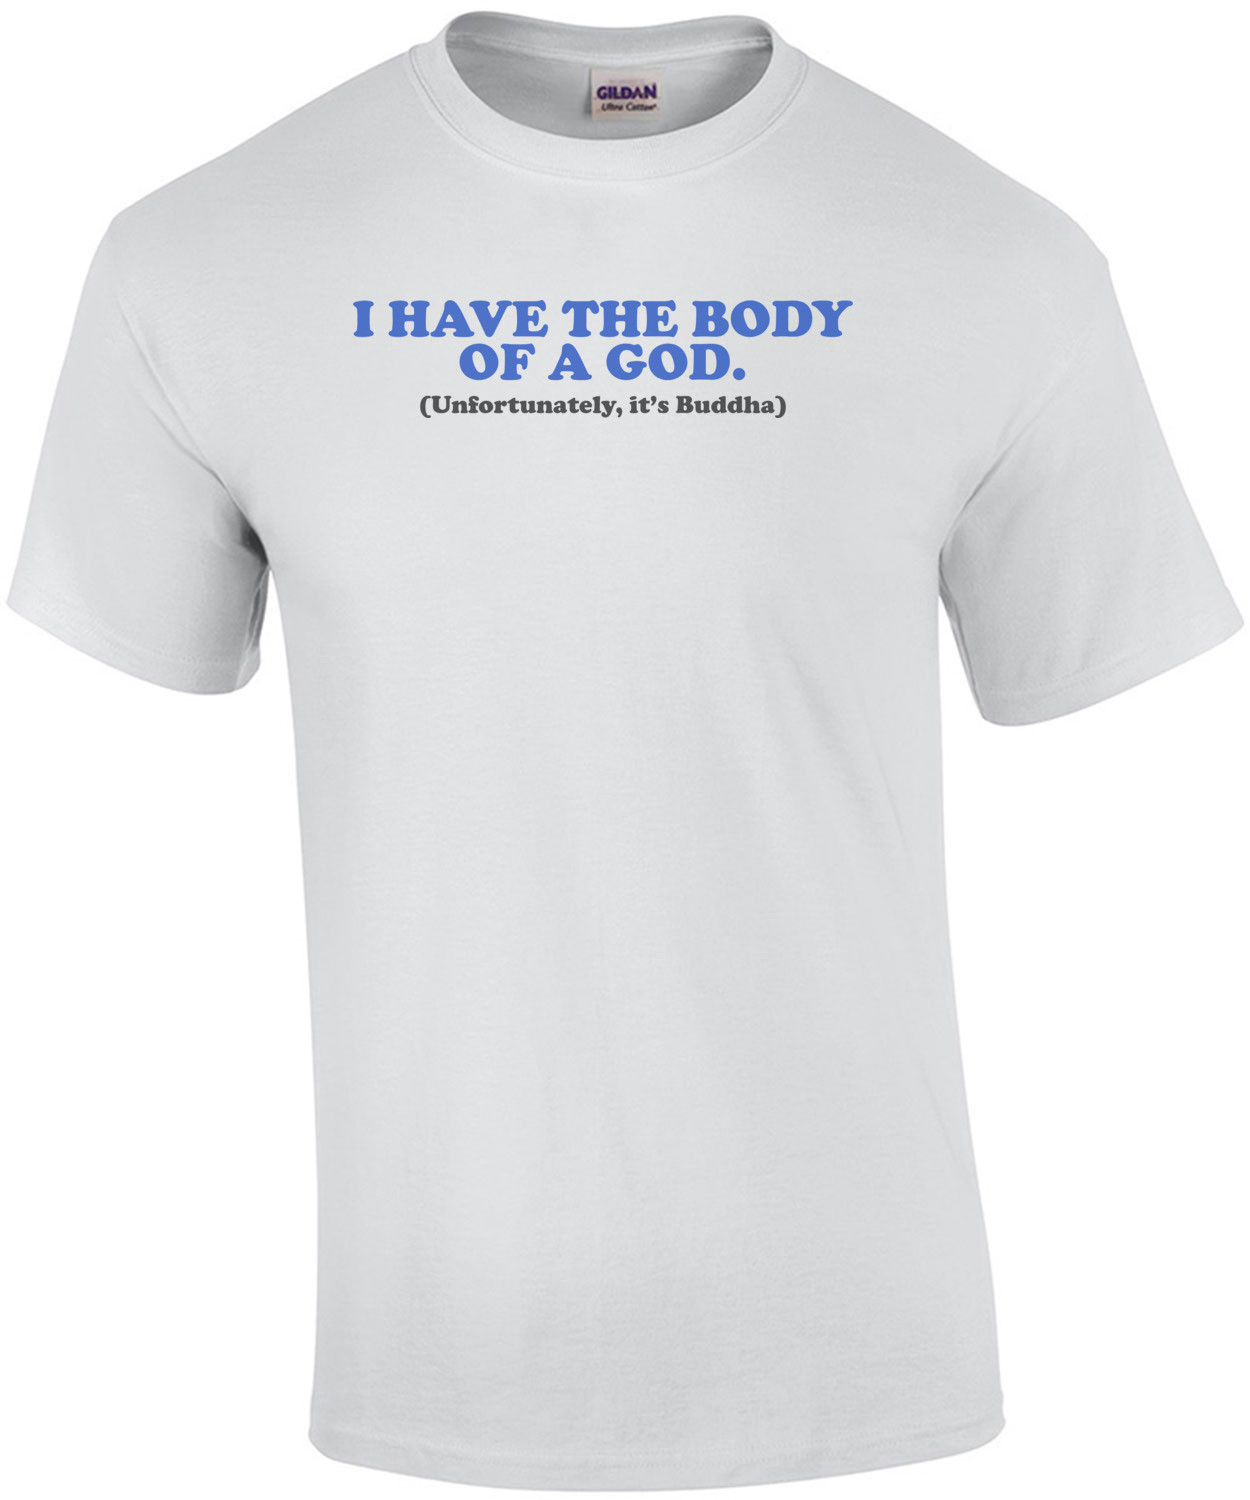 I Have The Body of a God Shirt